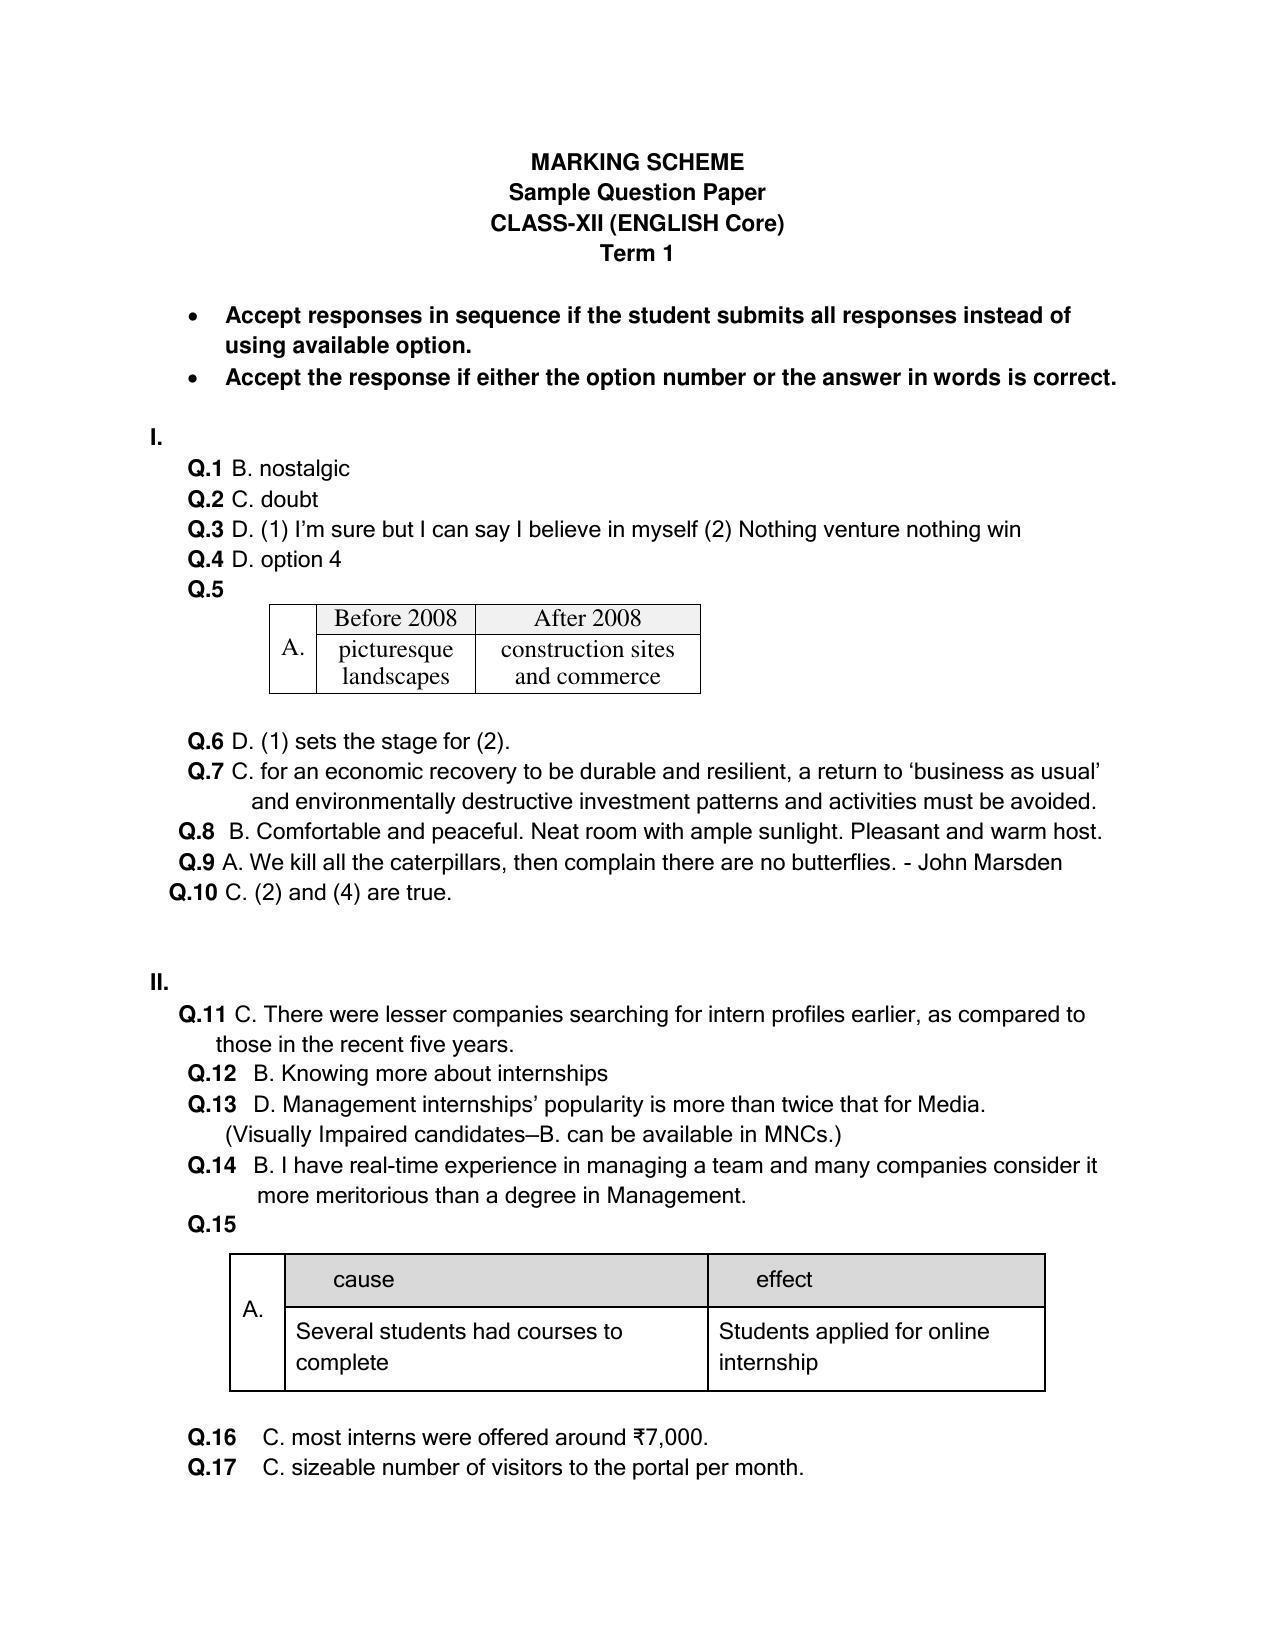 CBSE Class 12 English Core Marking Scheme and Solutions 2021-22 - Page 1